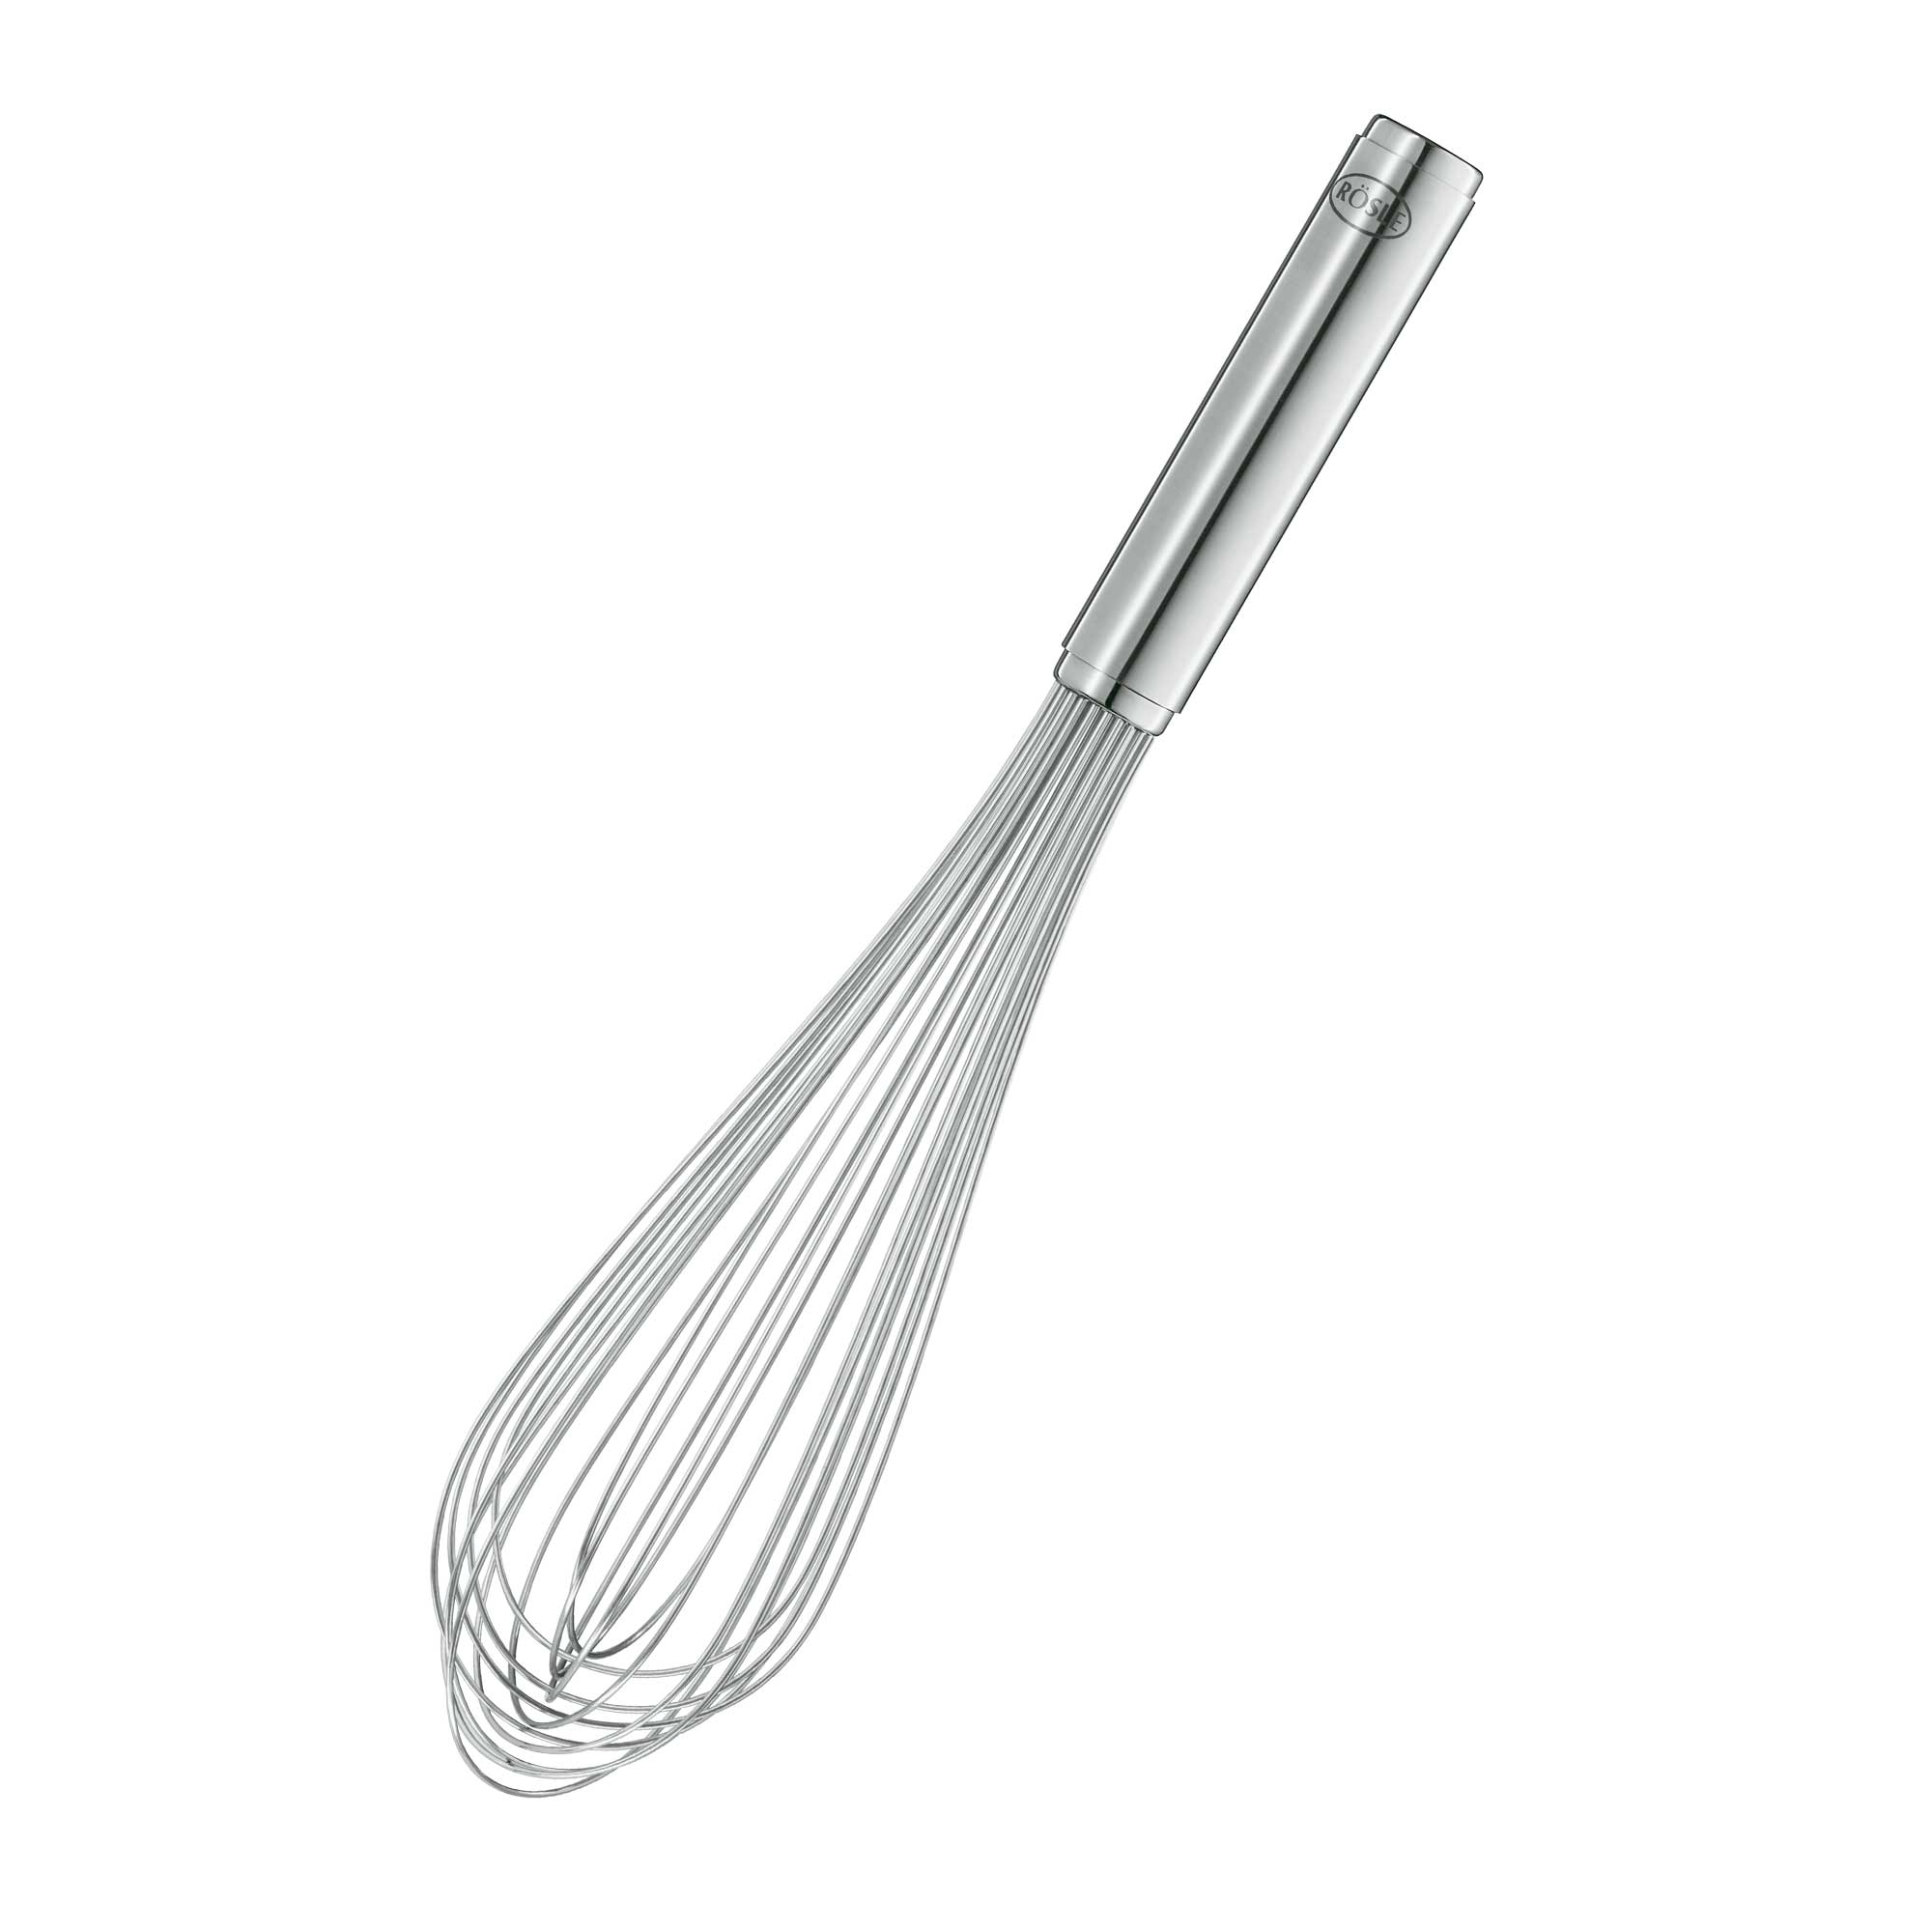 Balloon Whisk/Beater 30 cm|11.8 in. Classic